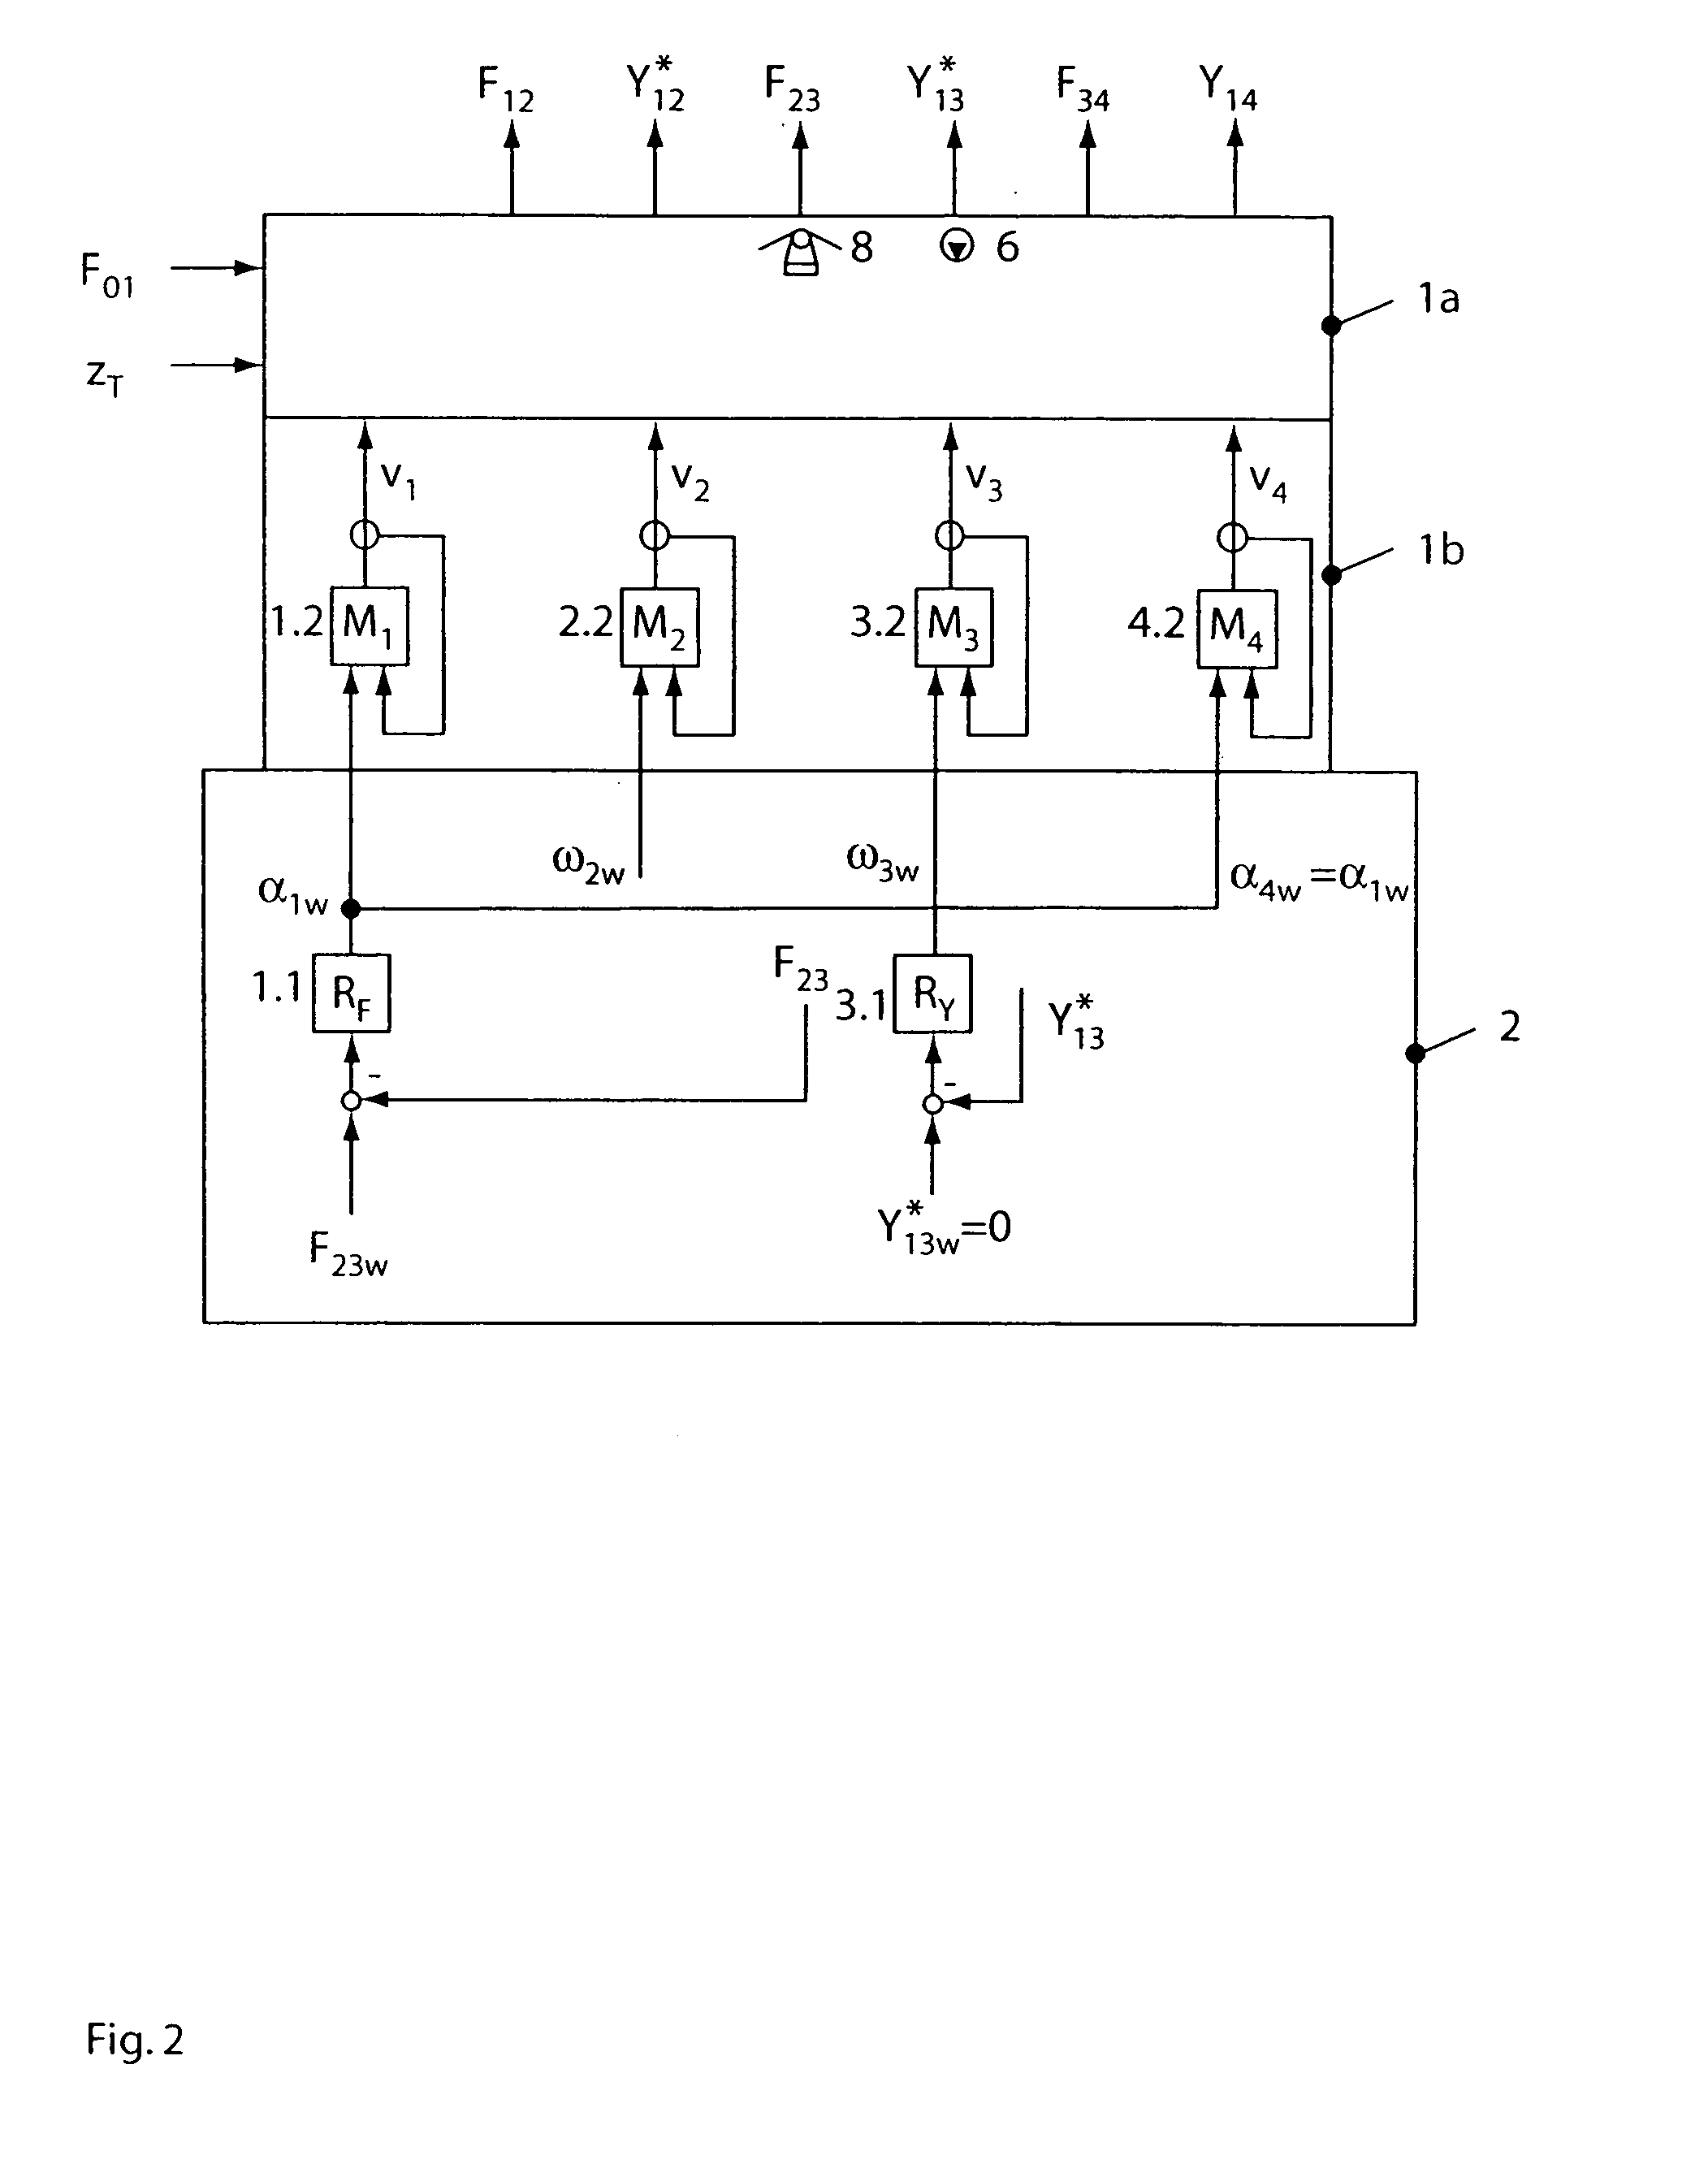 Method and apparatus for controlling the web tension and the cut register of a web-fed rotary press